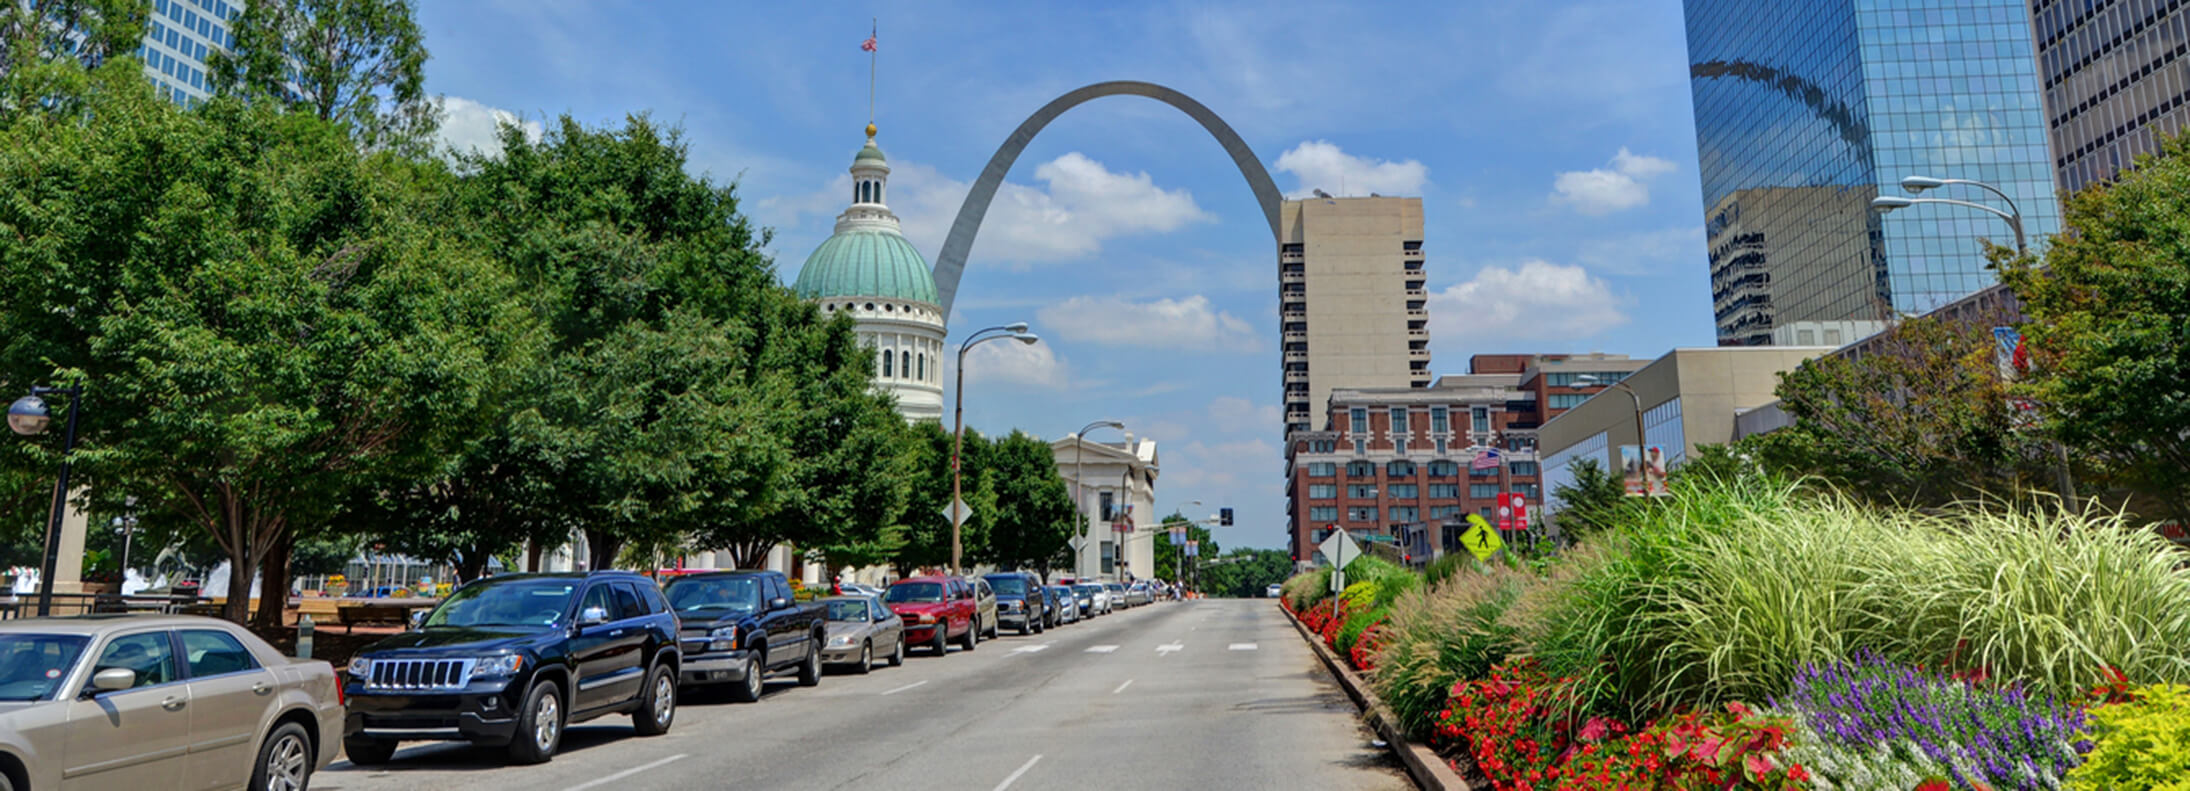 St Louis street and arch